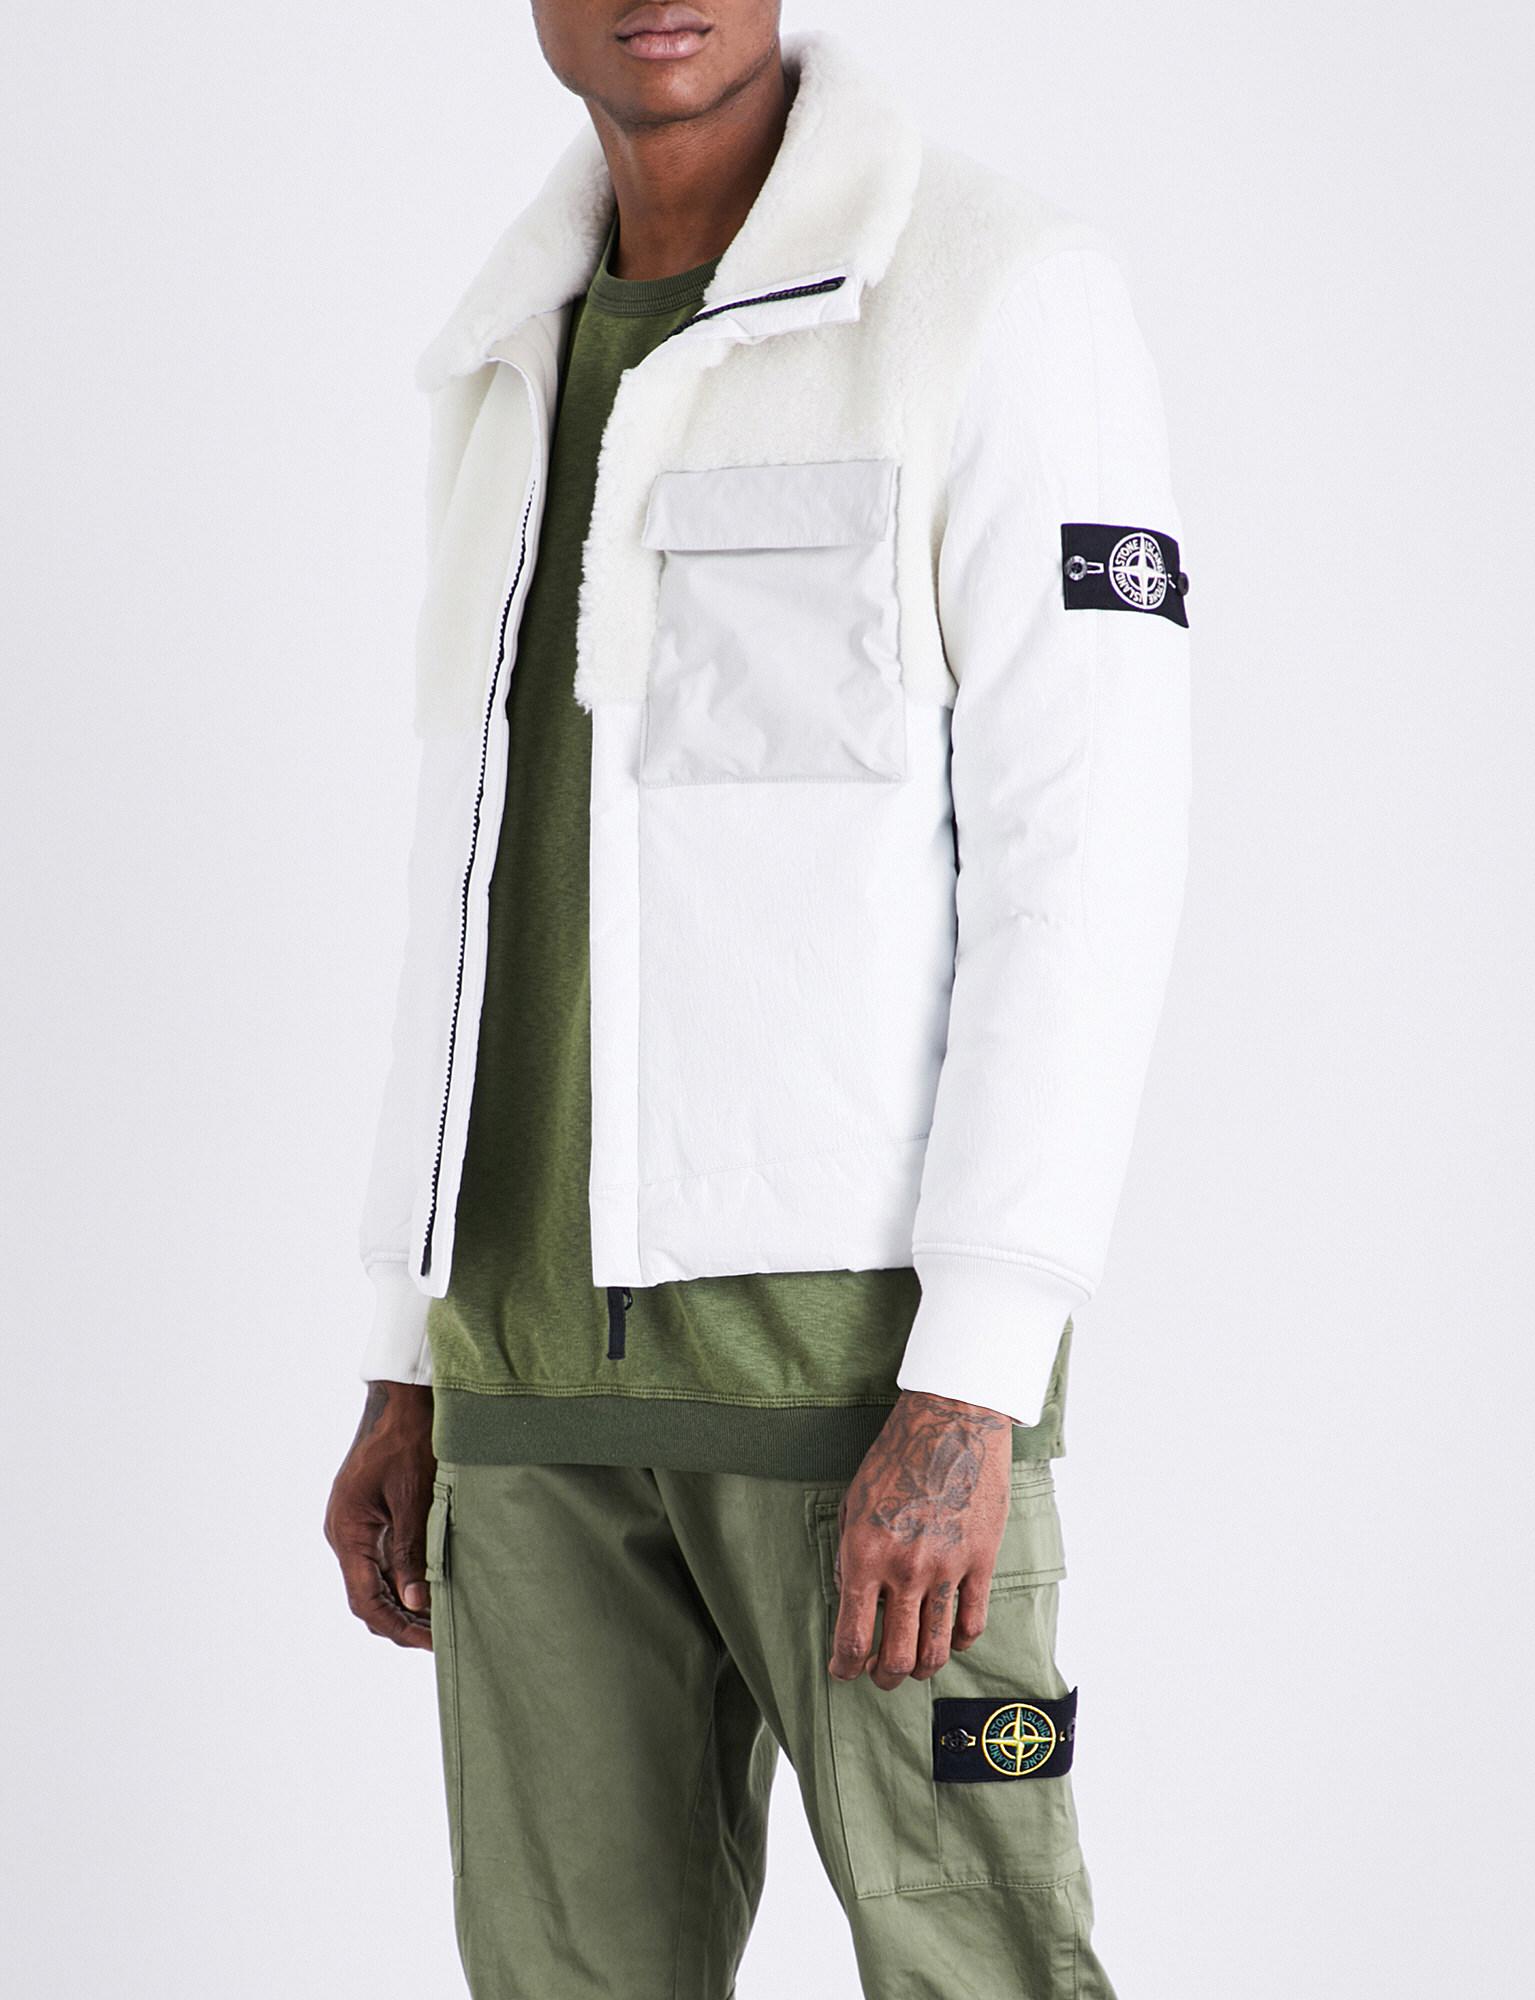 Stone Island Featherweight Primloft Leather Coat in White for Men - Lyst